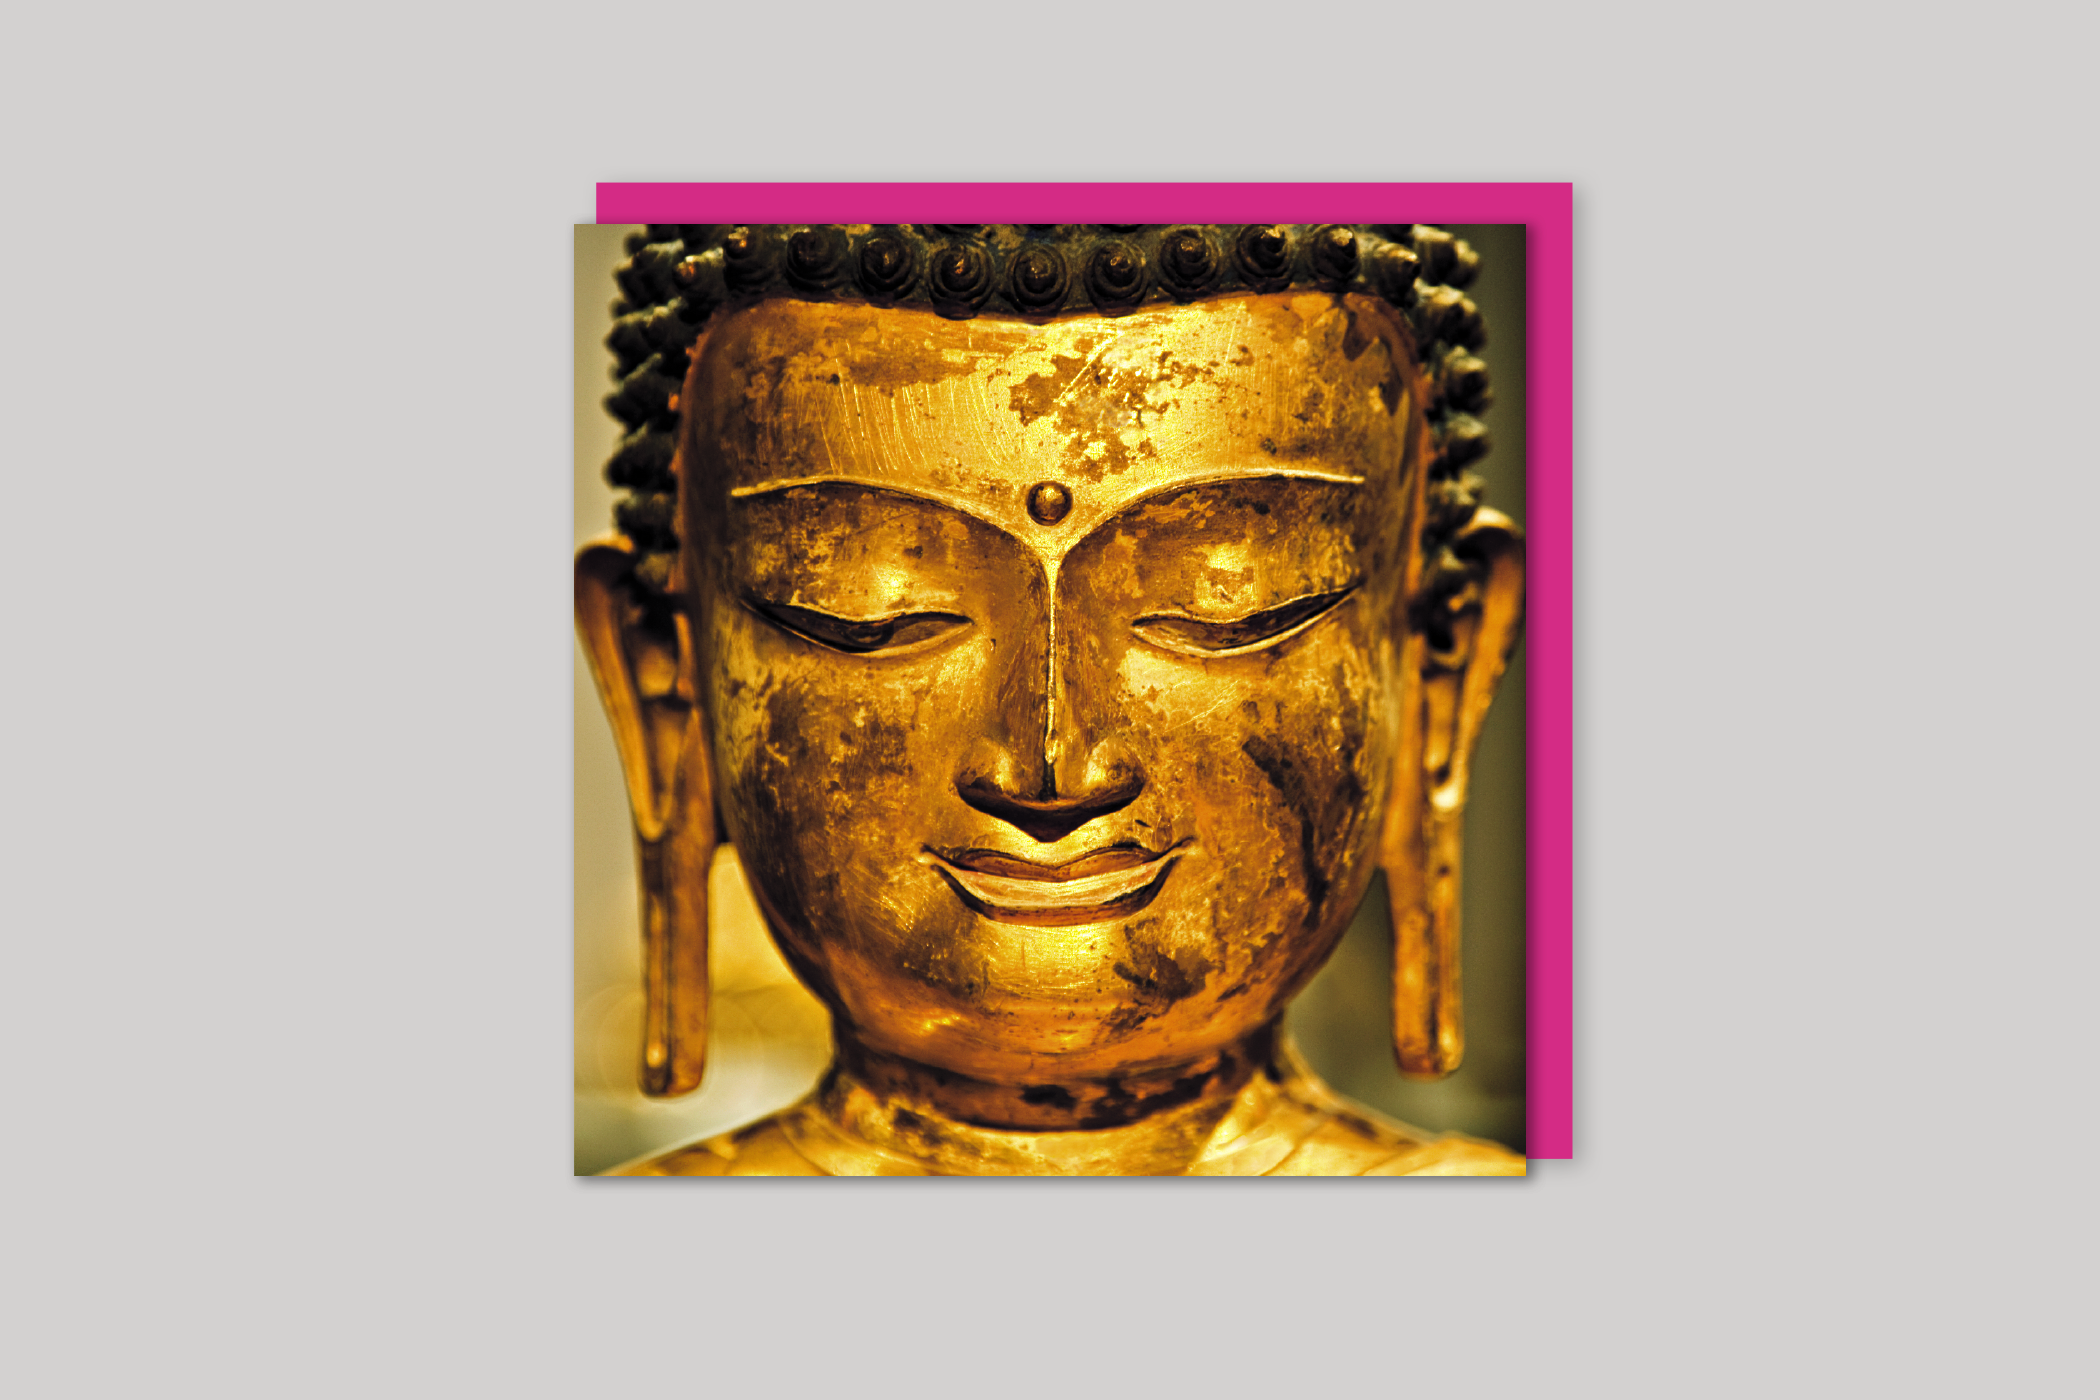 Golden Buddha from Exposure range of photographic cards by Icon, back page.